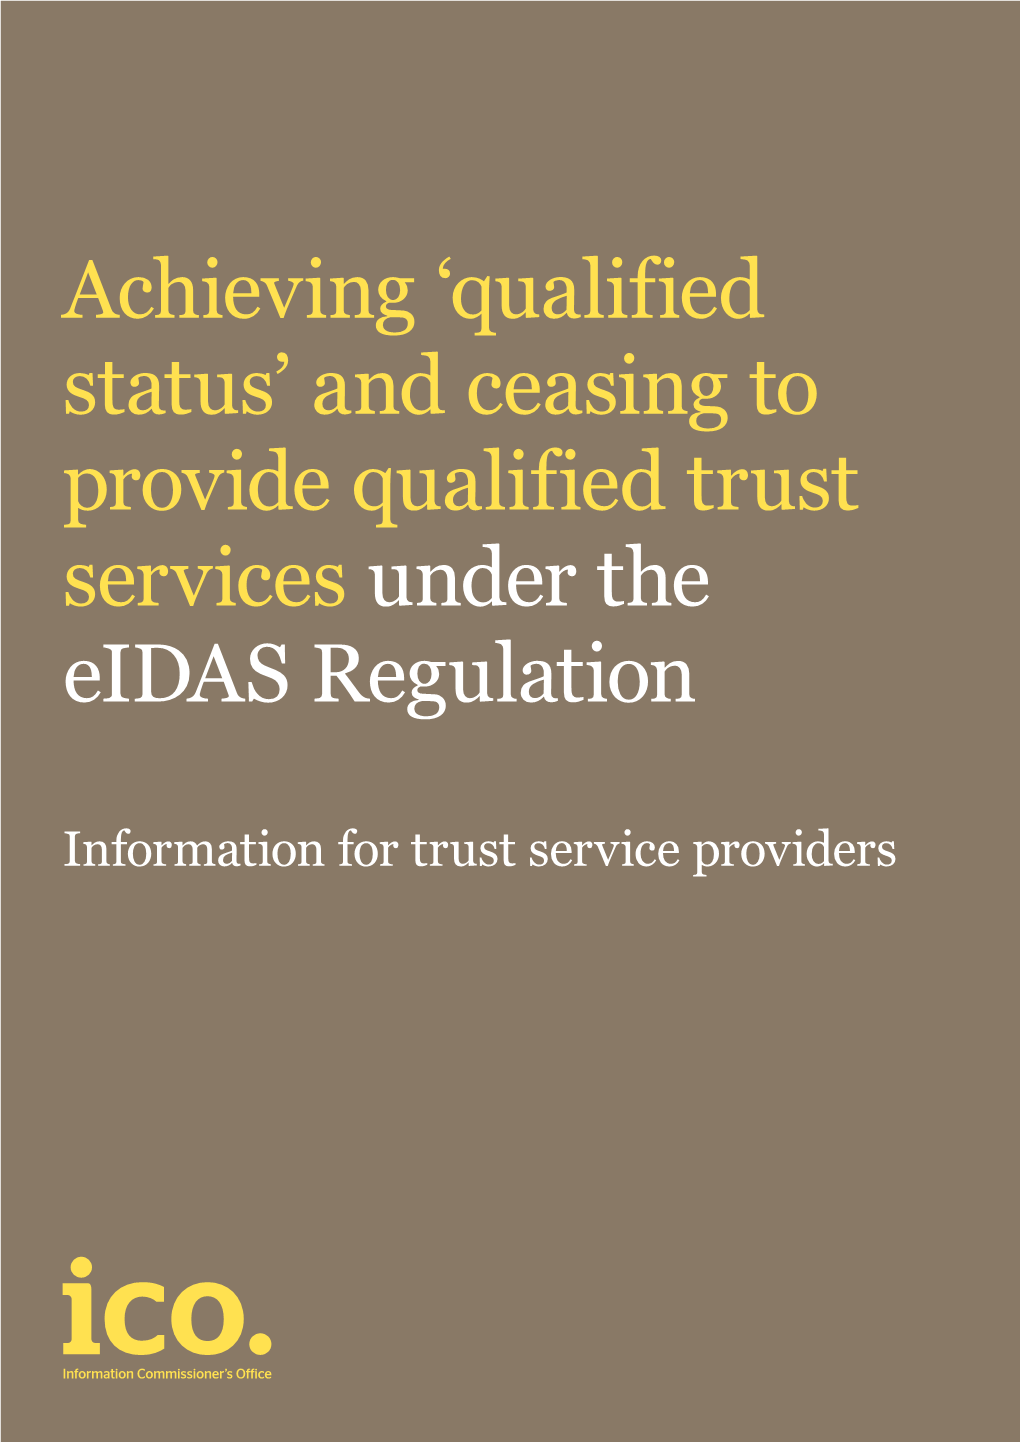 And Ceasing to Provide Qualified Trust Services Under the Eidas Regulation